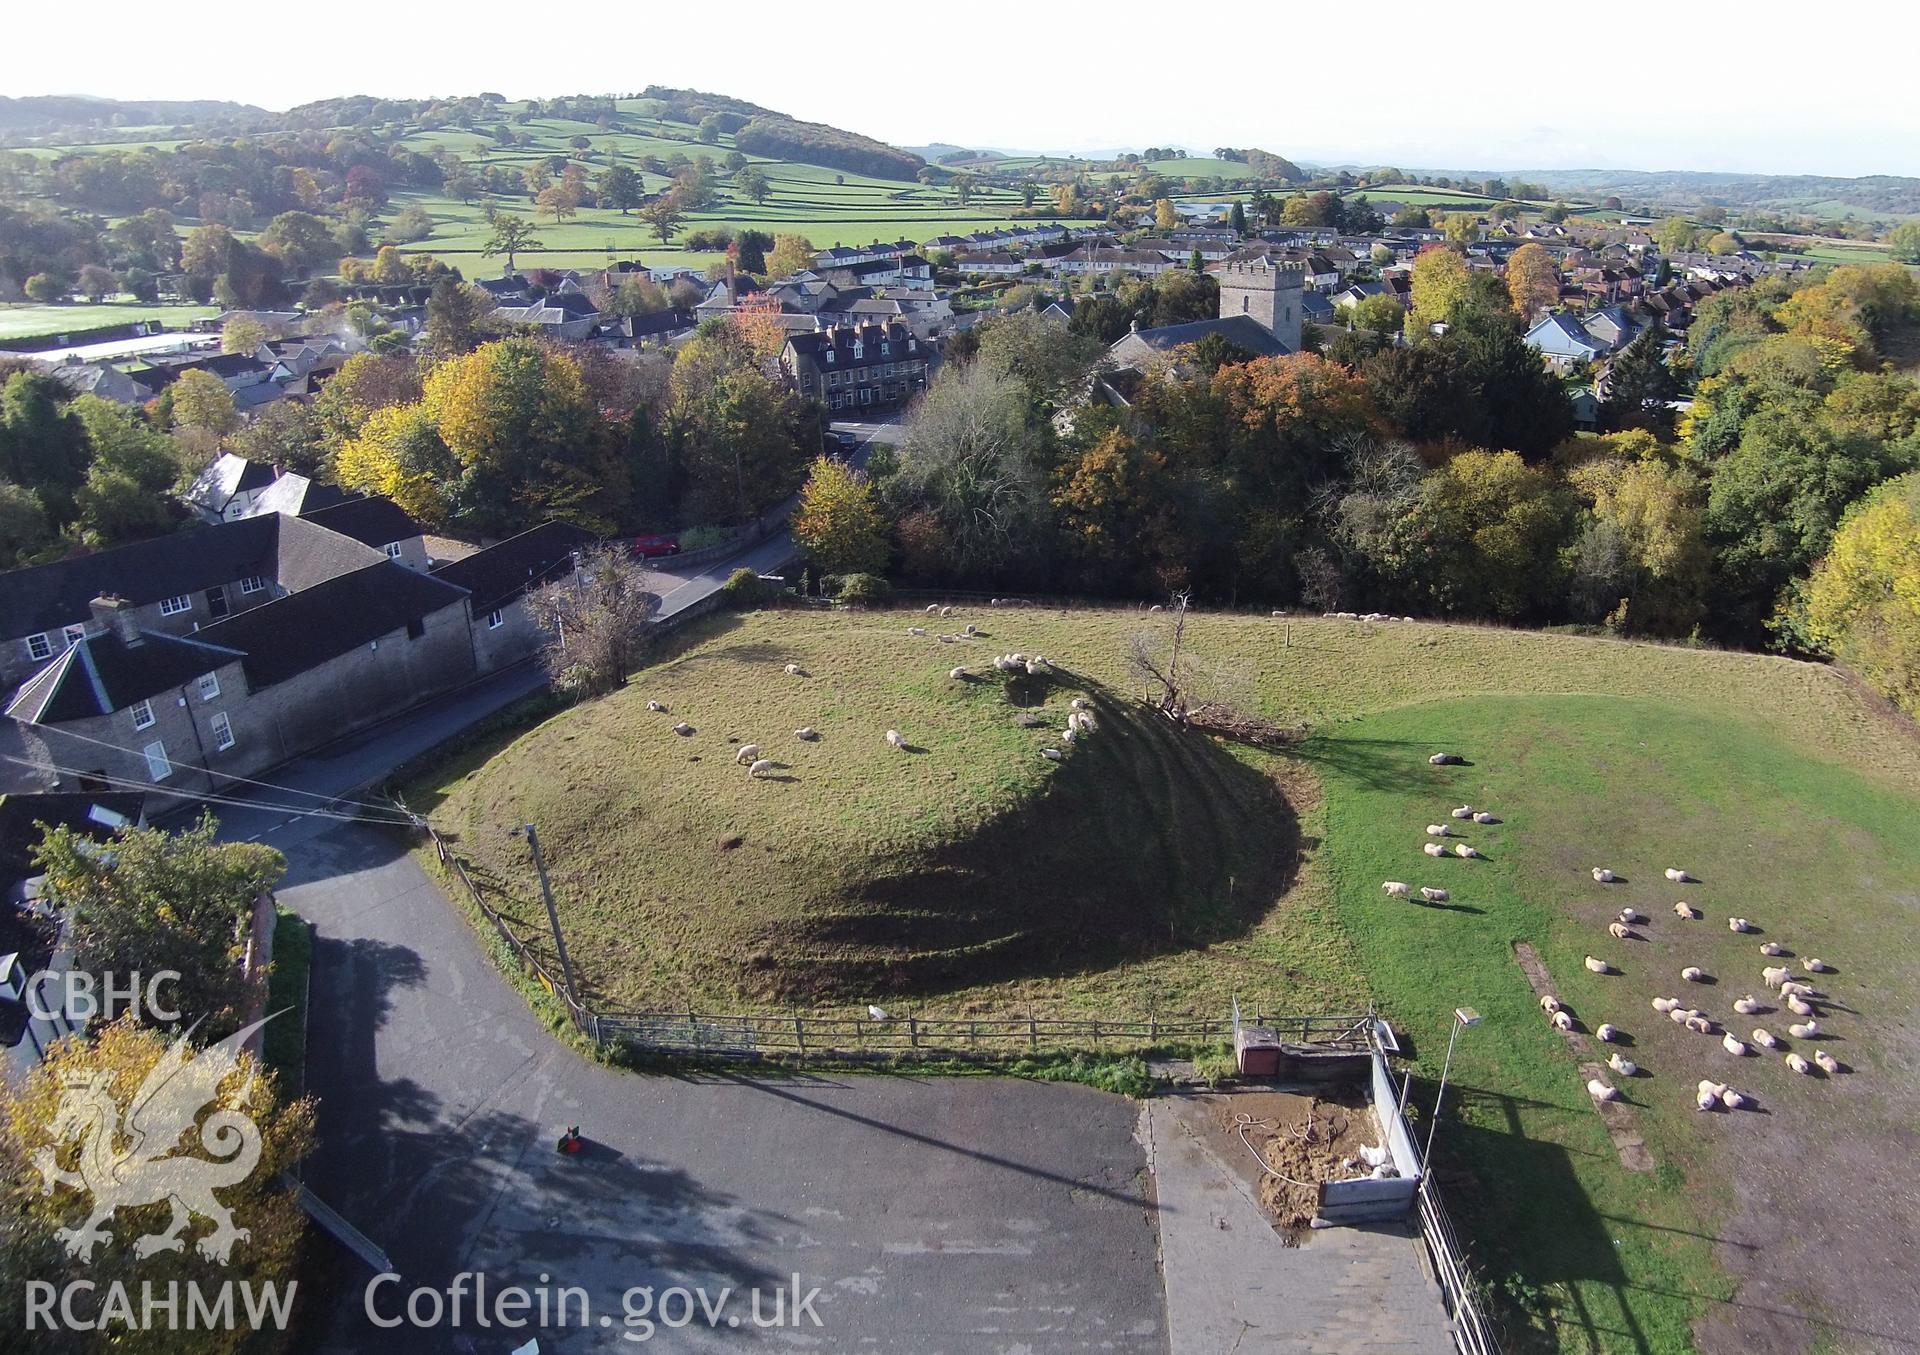 Aerial photograph showing Hay Motte, taken by Paul Davis, 25th October 2015.